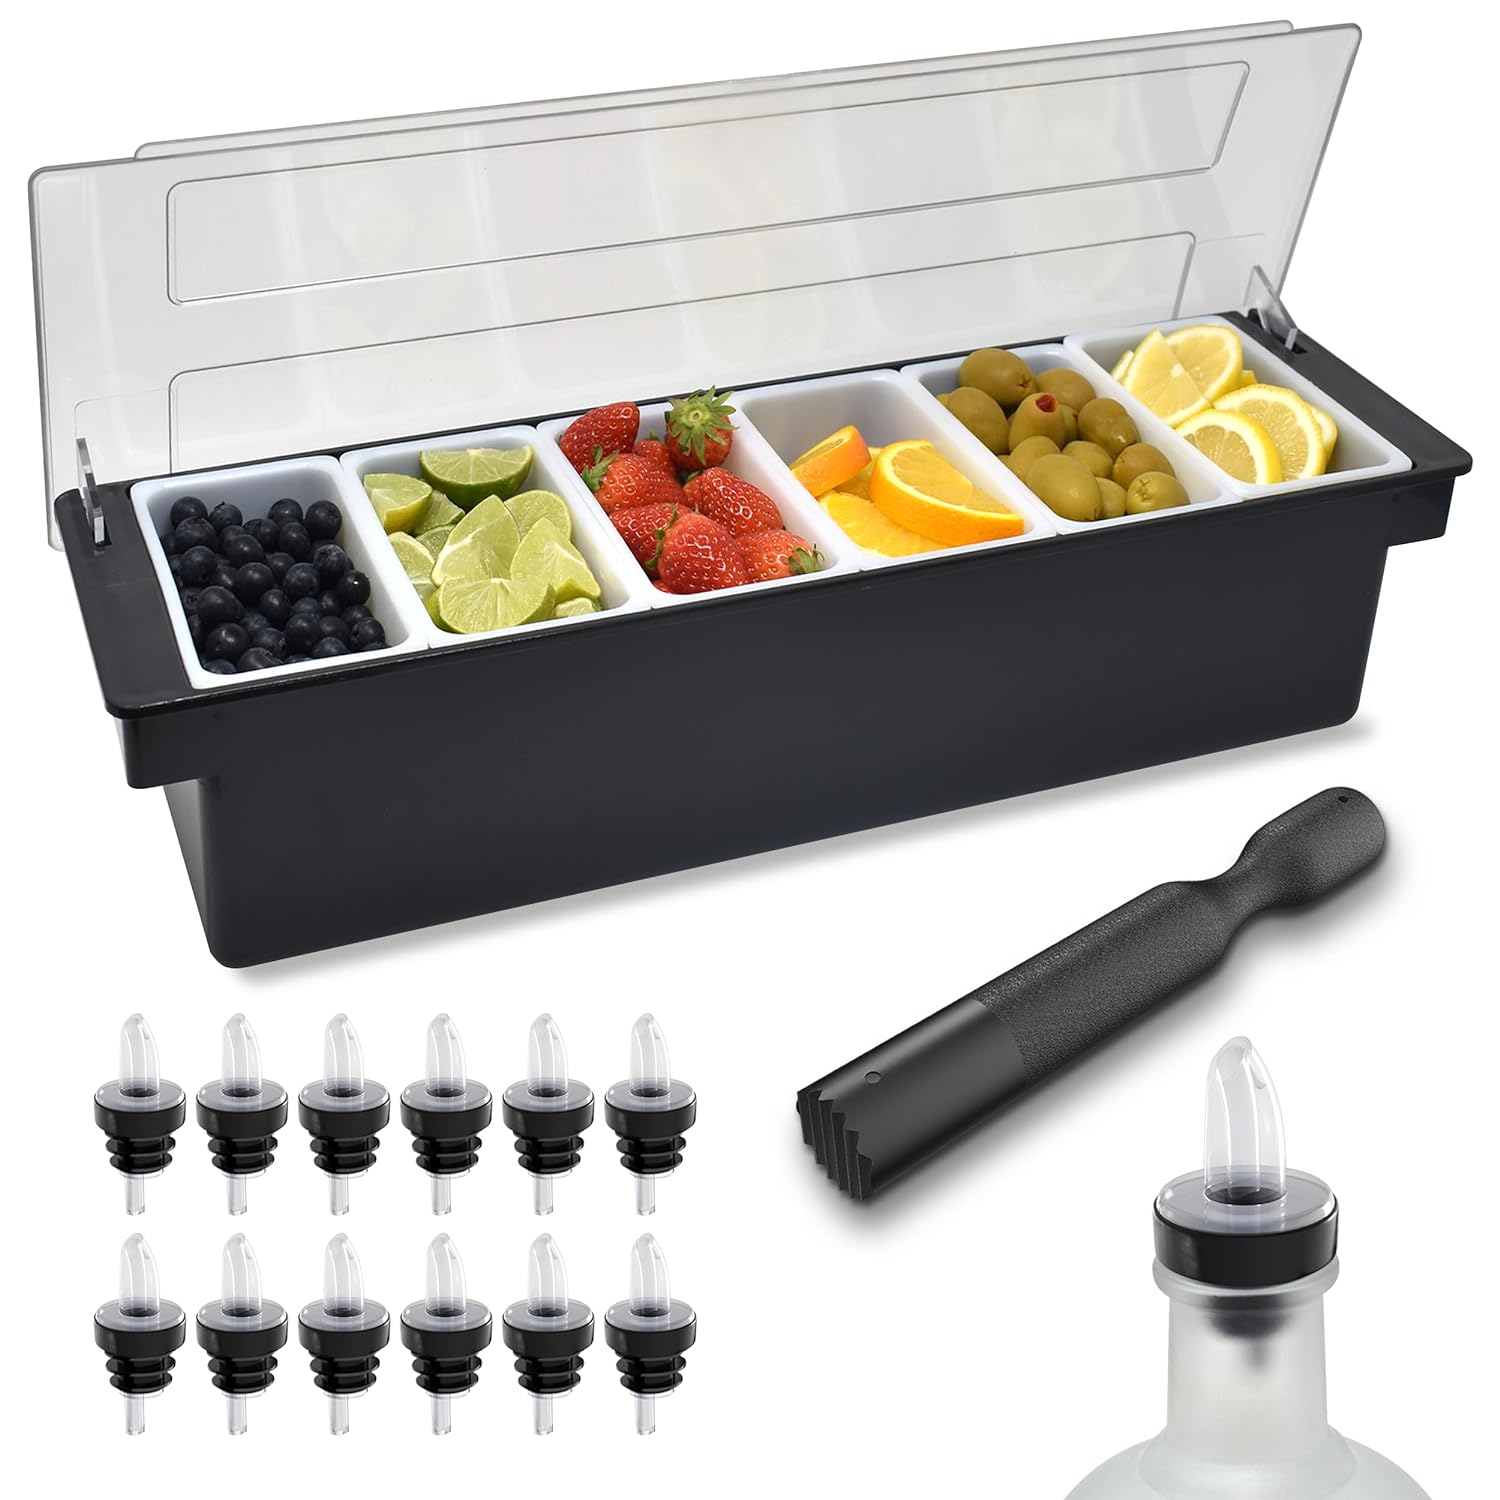 Featured image for “Esatto Bar Products Condiment Holder with 6 – 1 Pint Inserts Black”